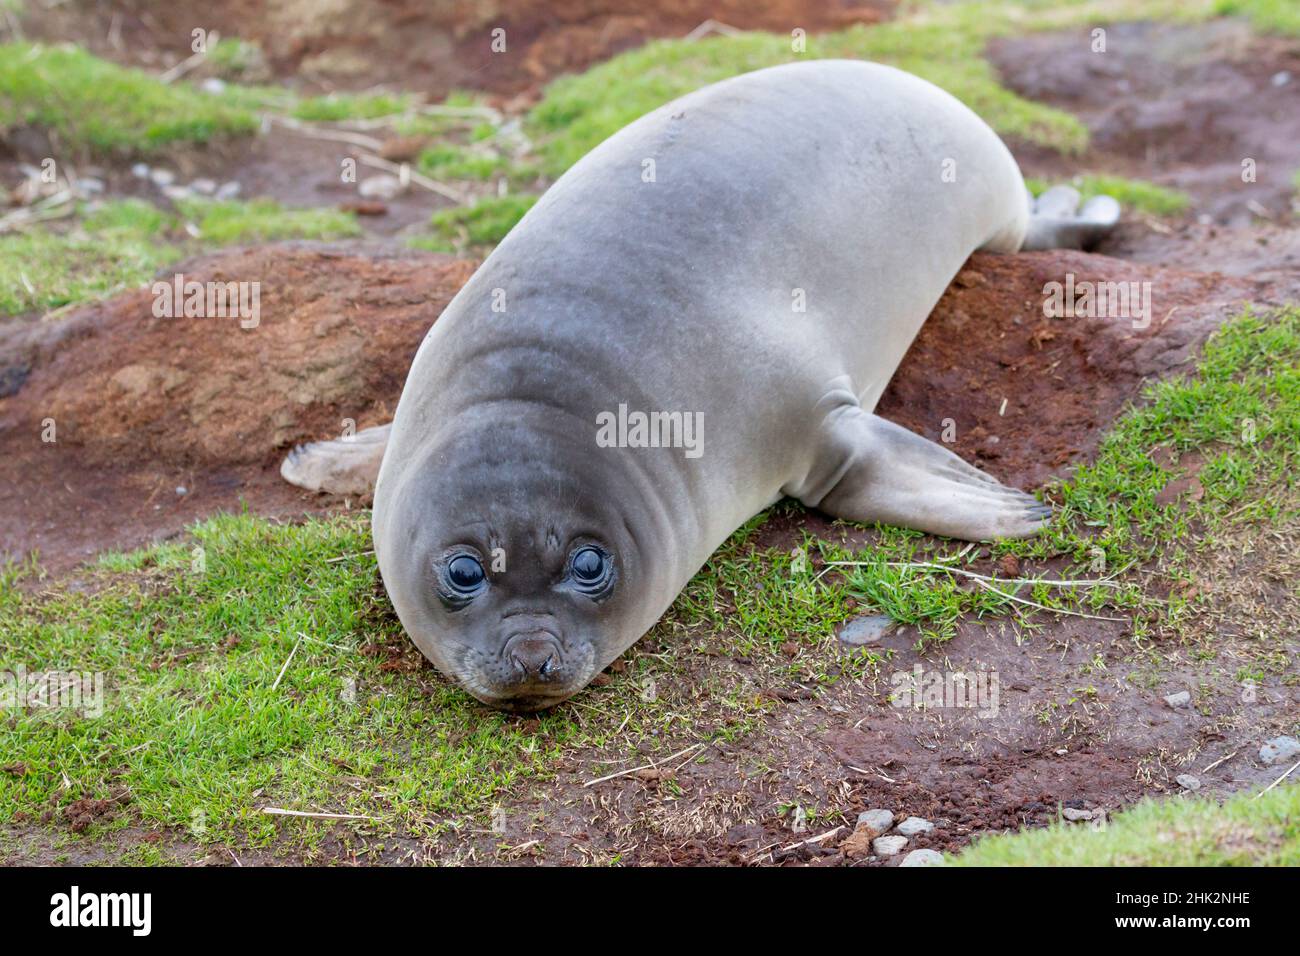 Southern Ocean, South Georgia. Portrait of a weaner or young elephant seal. Stock Photo